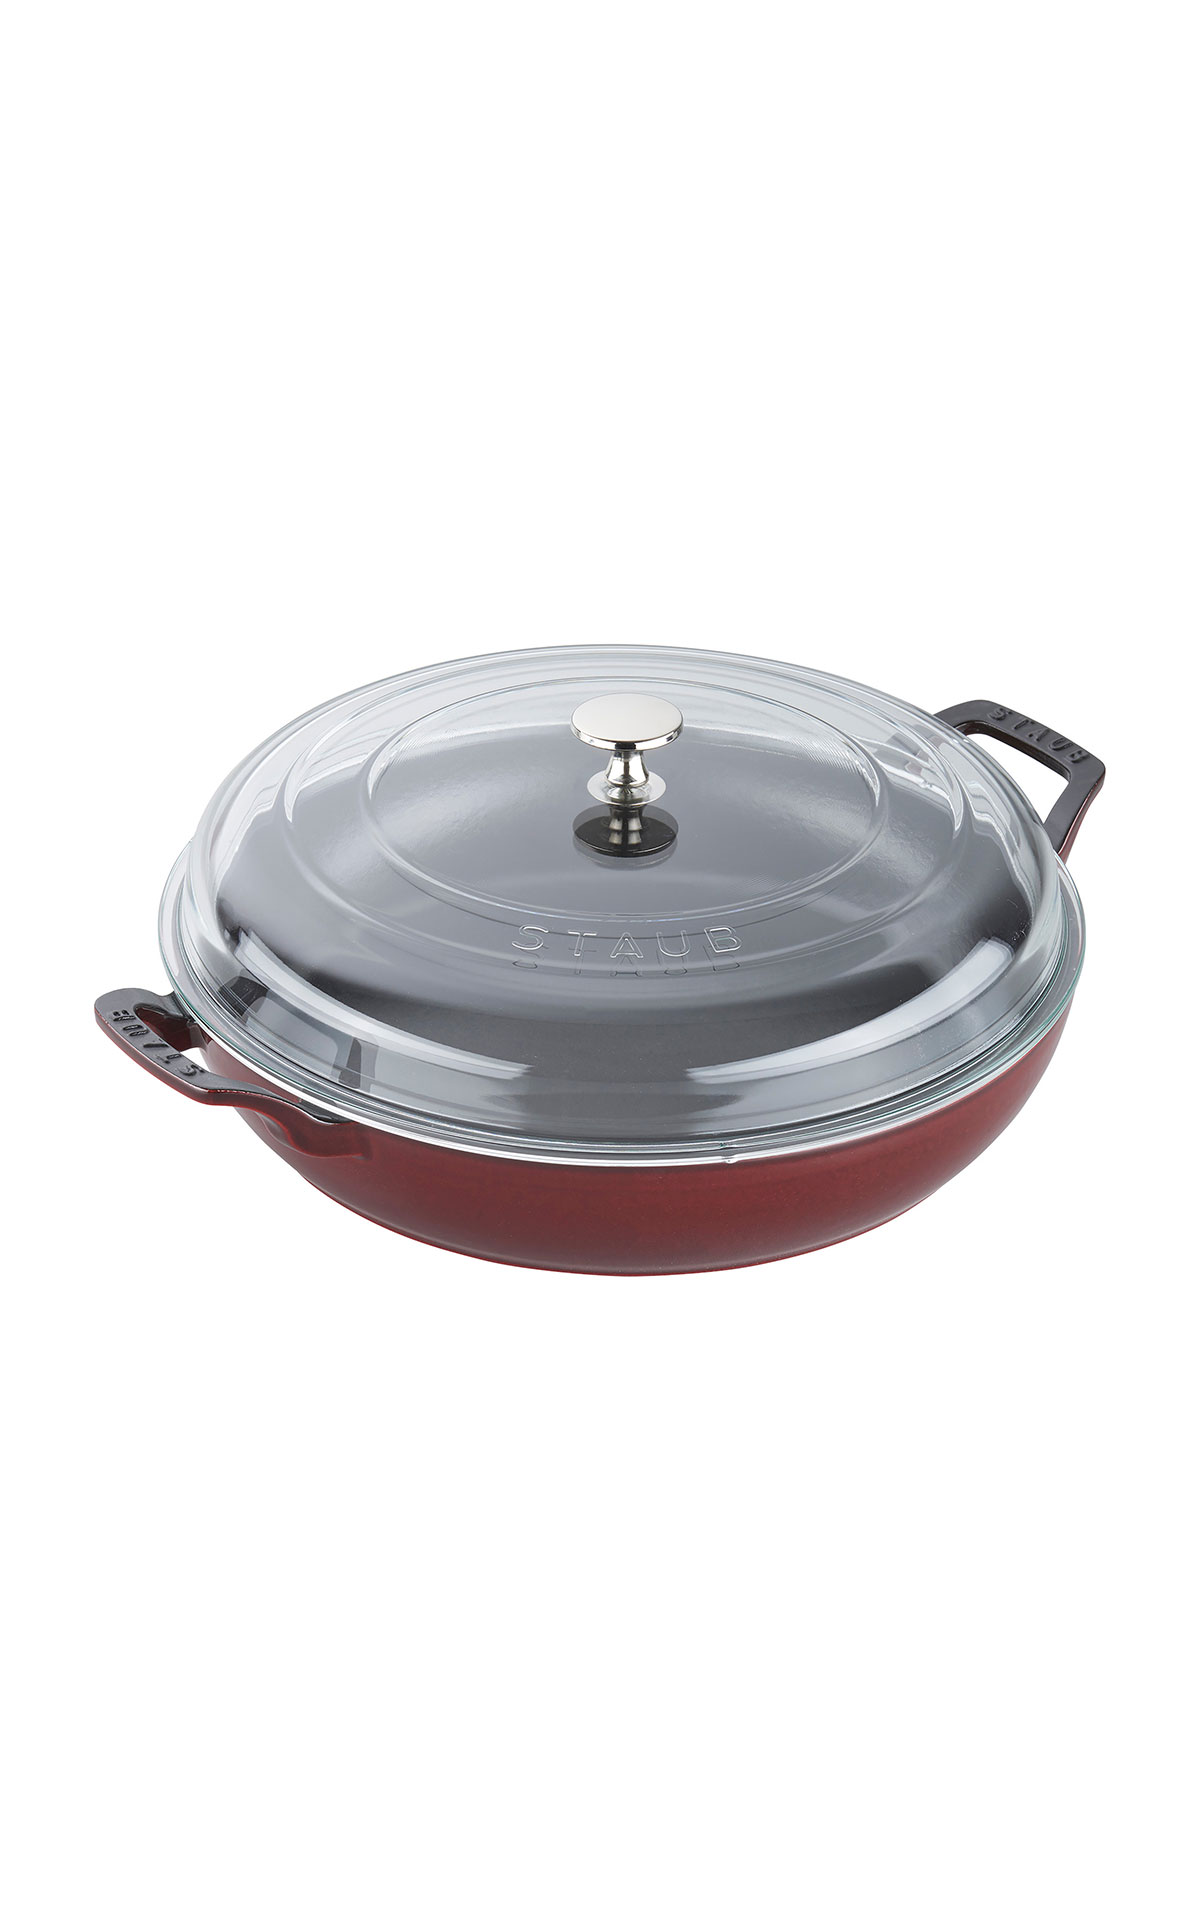 ZWILLING STAUB saute pan with glass lid from Bicester Village